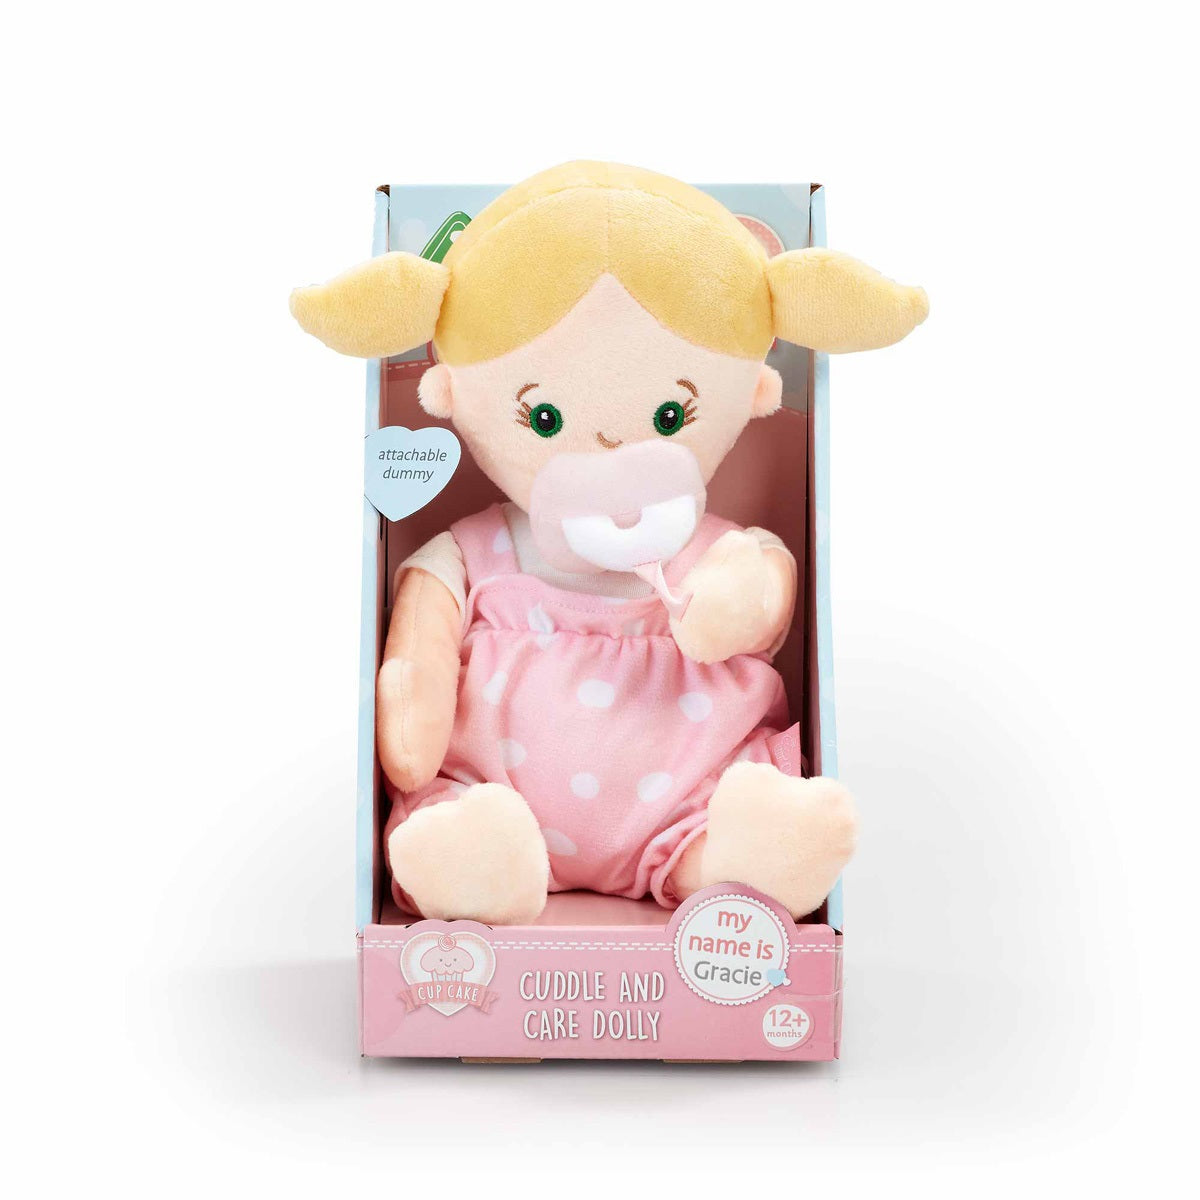 Cupcake Cuddle and Care Dolly Gracie Baby Doll